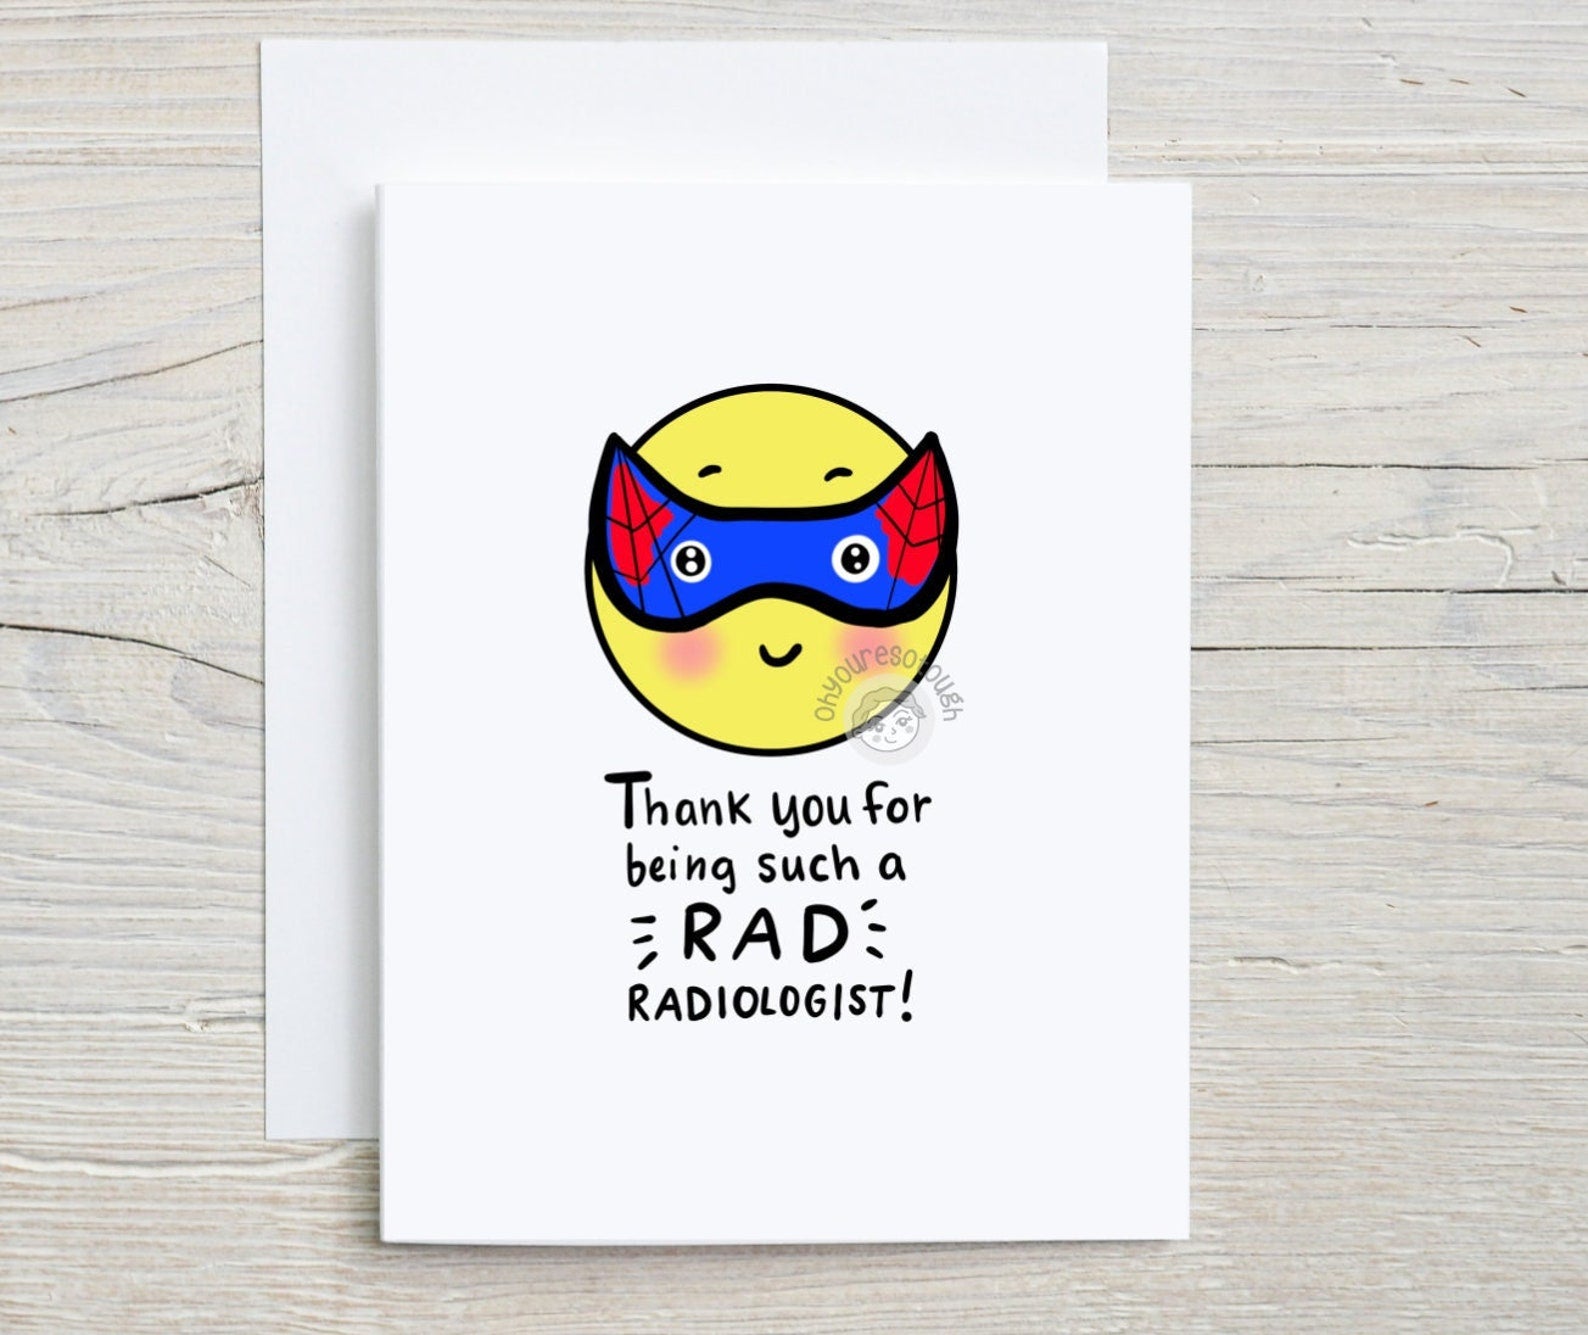 Radiologist Thank You Card Funny - Doctor Thank You Card - Doctor Card - Doctor Appreciation Gift - Radiologist Card - Radiologist Gift